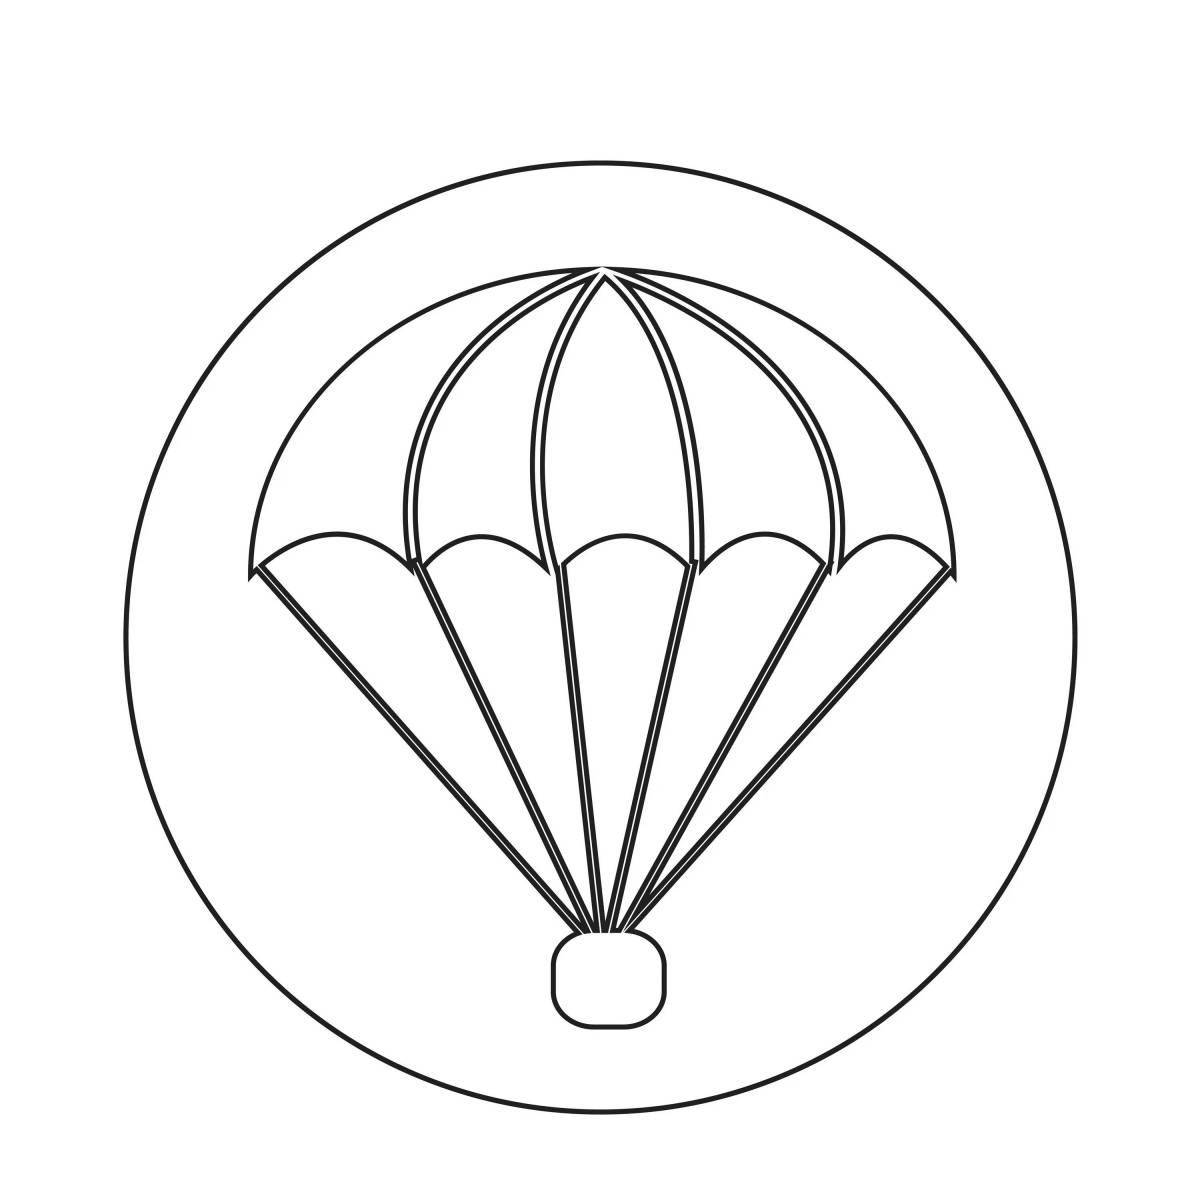 A fun military parachutist coloring book for kids